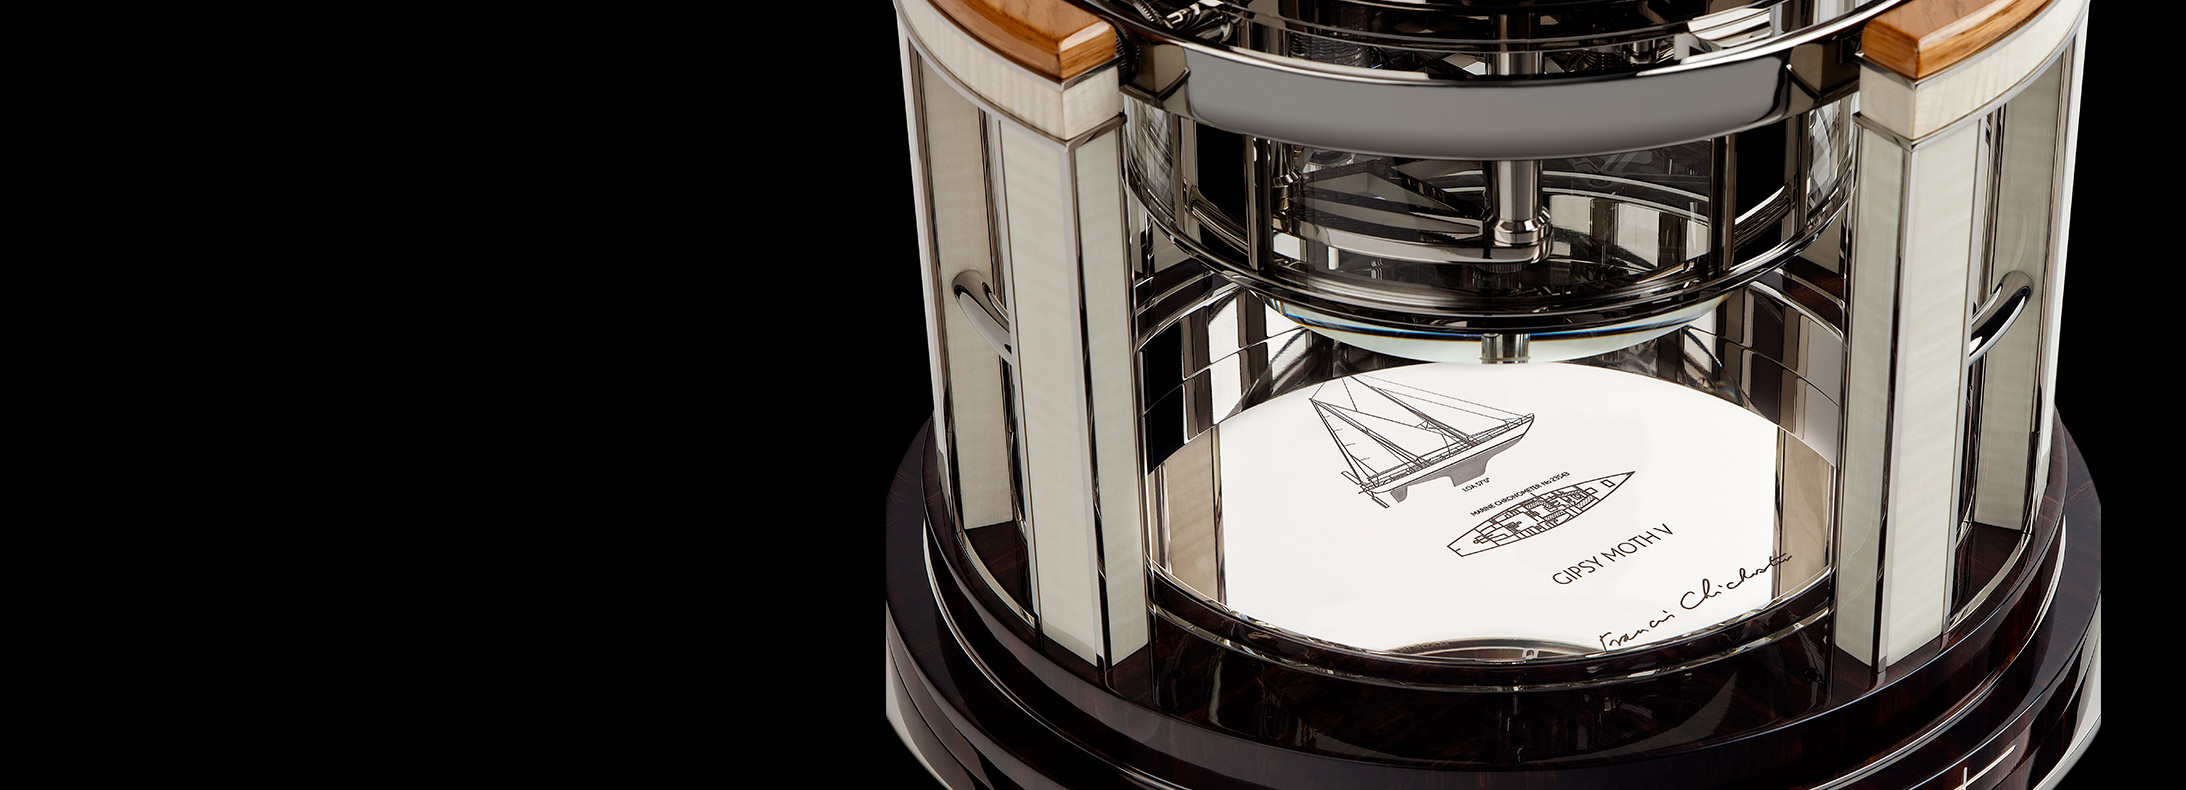 The Legacy marine chronometer tribute to Sir Francis Chichester